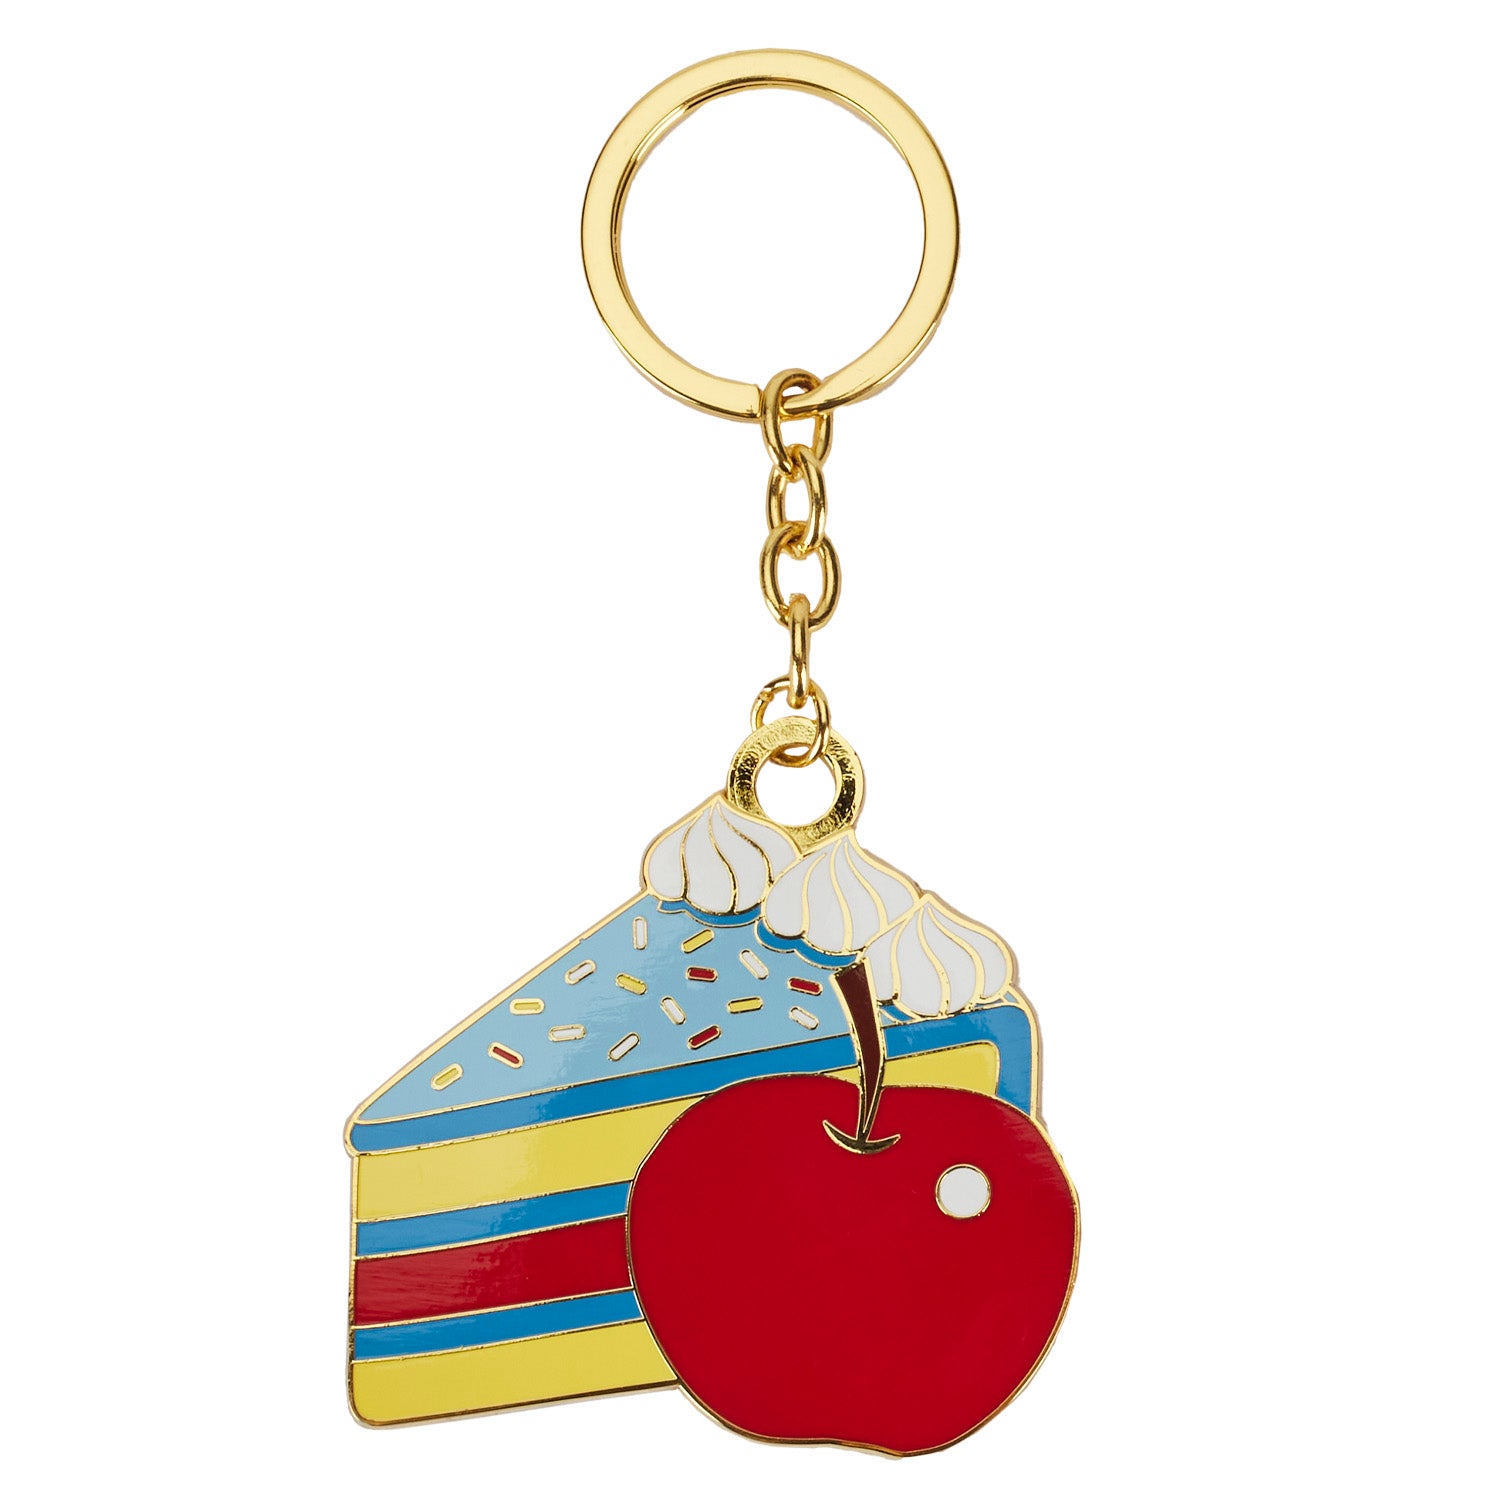 Loungefly Disney Princess Sweets Enamel Keychain.  Available at Blue Culture Tees!